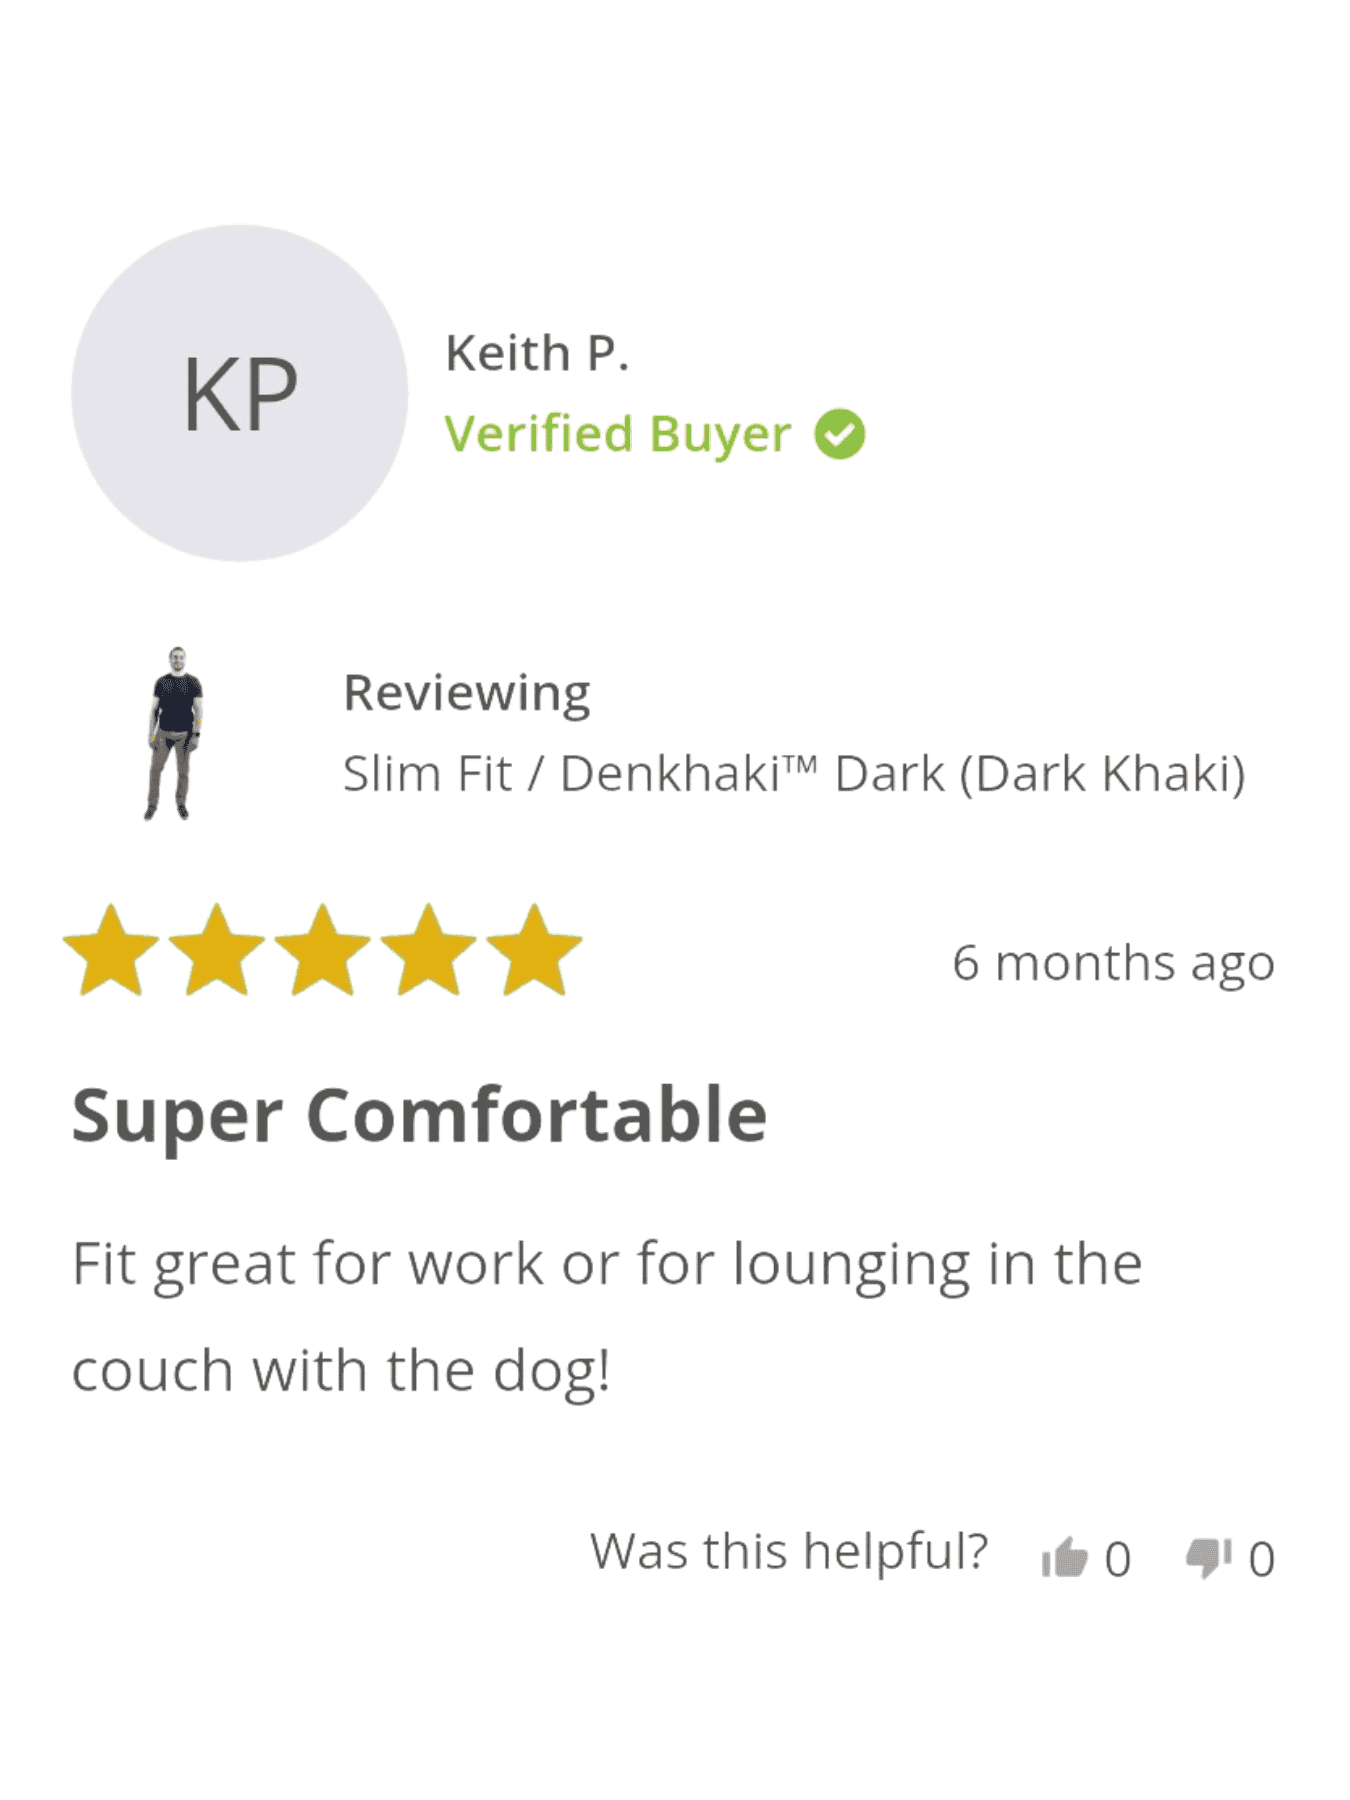 Perfect customer KP's 5-star review for Slim Fit Denkhaki Darks